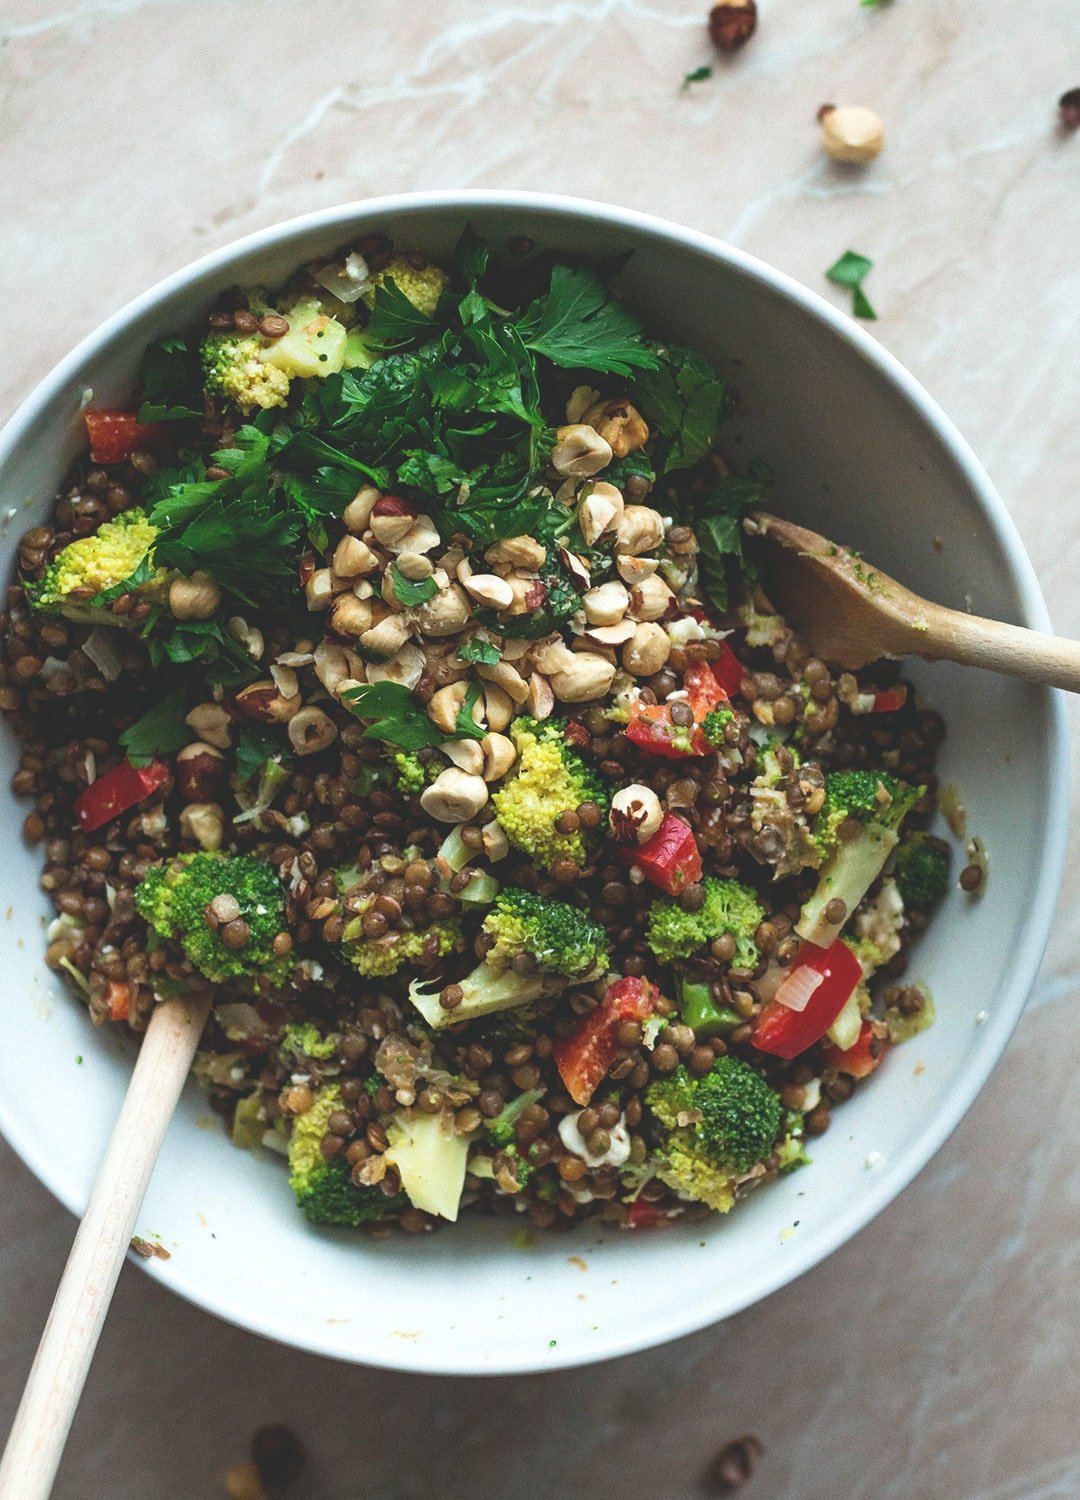 French Lentil Broccoli Salad (vegan, GF) - you totally have to try this delicious salad recipe! It's fresh, it's full of flavor and absolutely scrumptious! | recipe by @healthfulideas thehealthfulideas.com